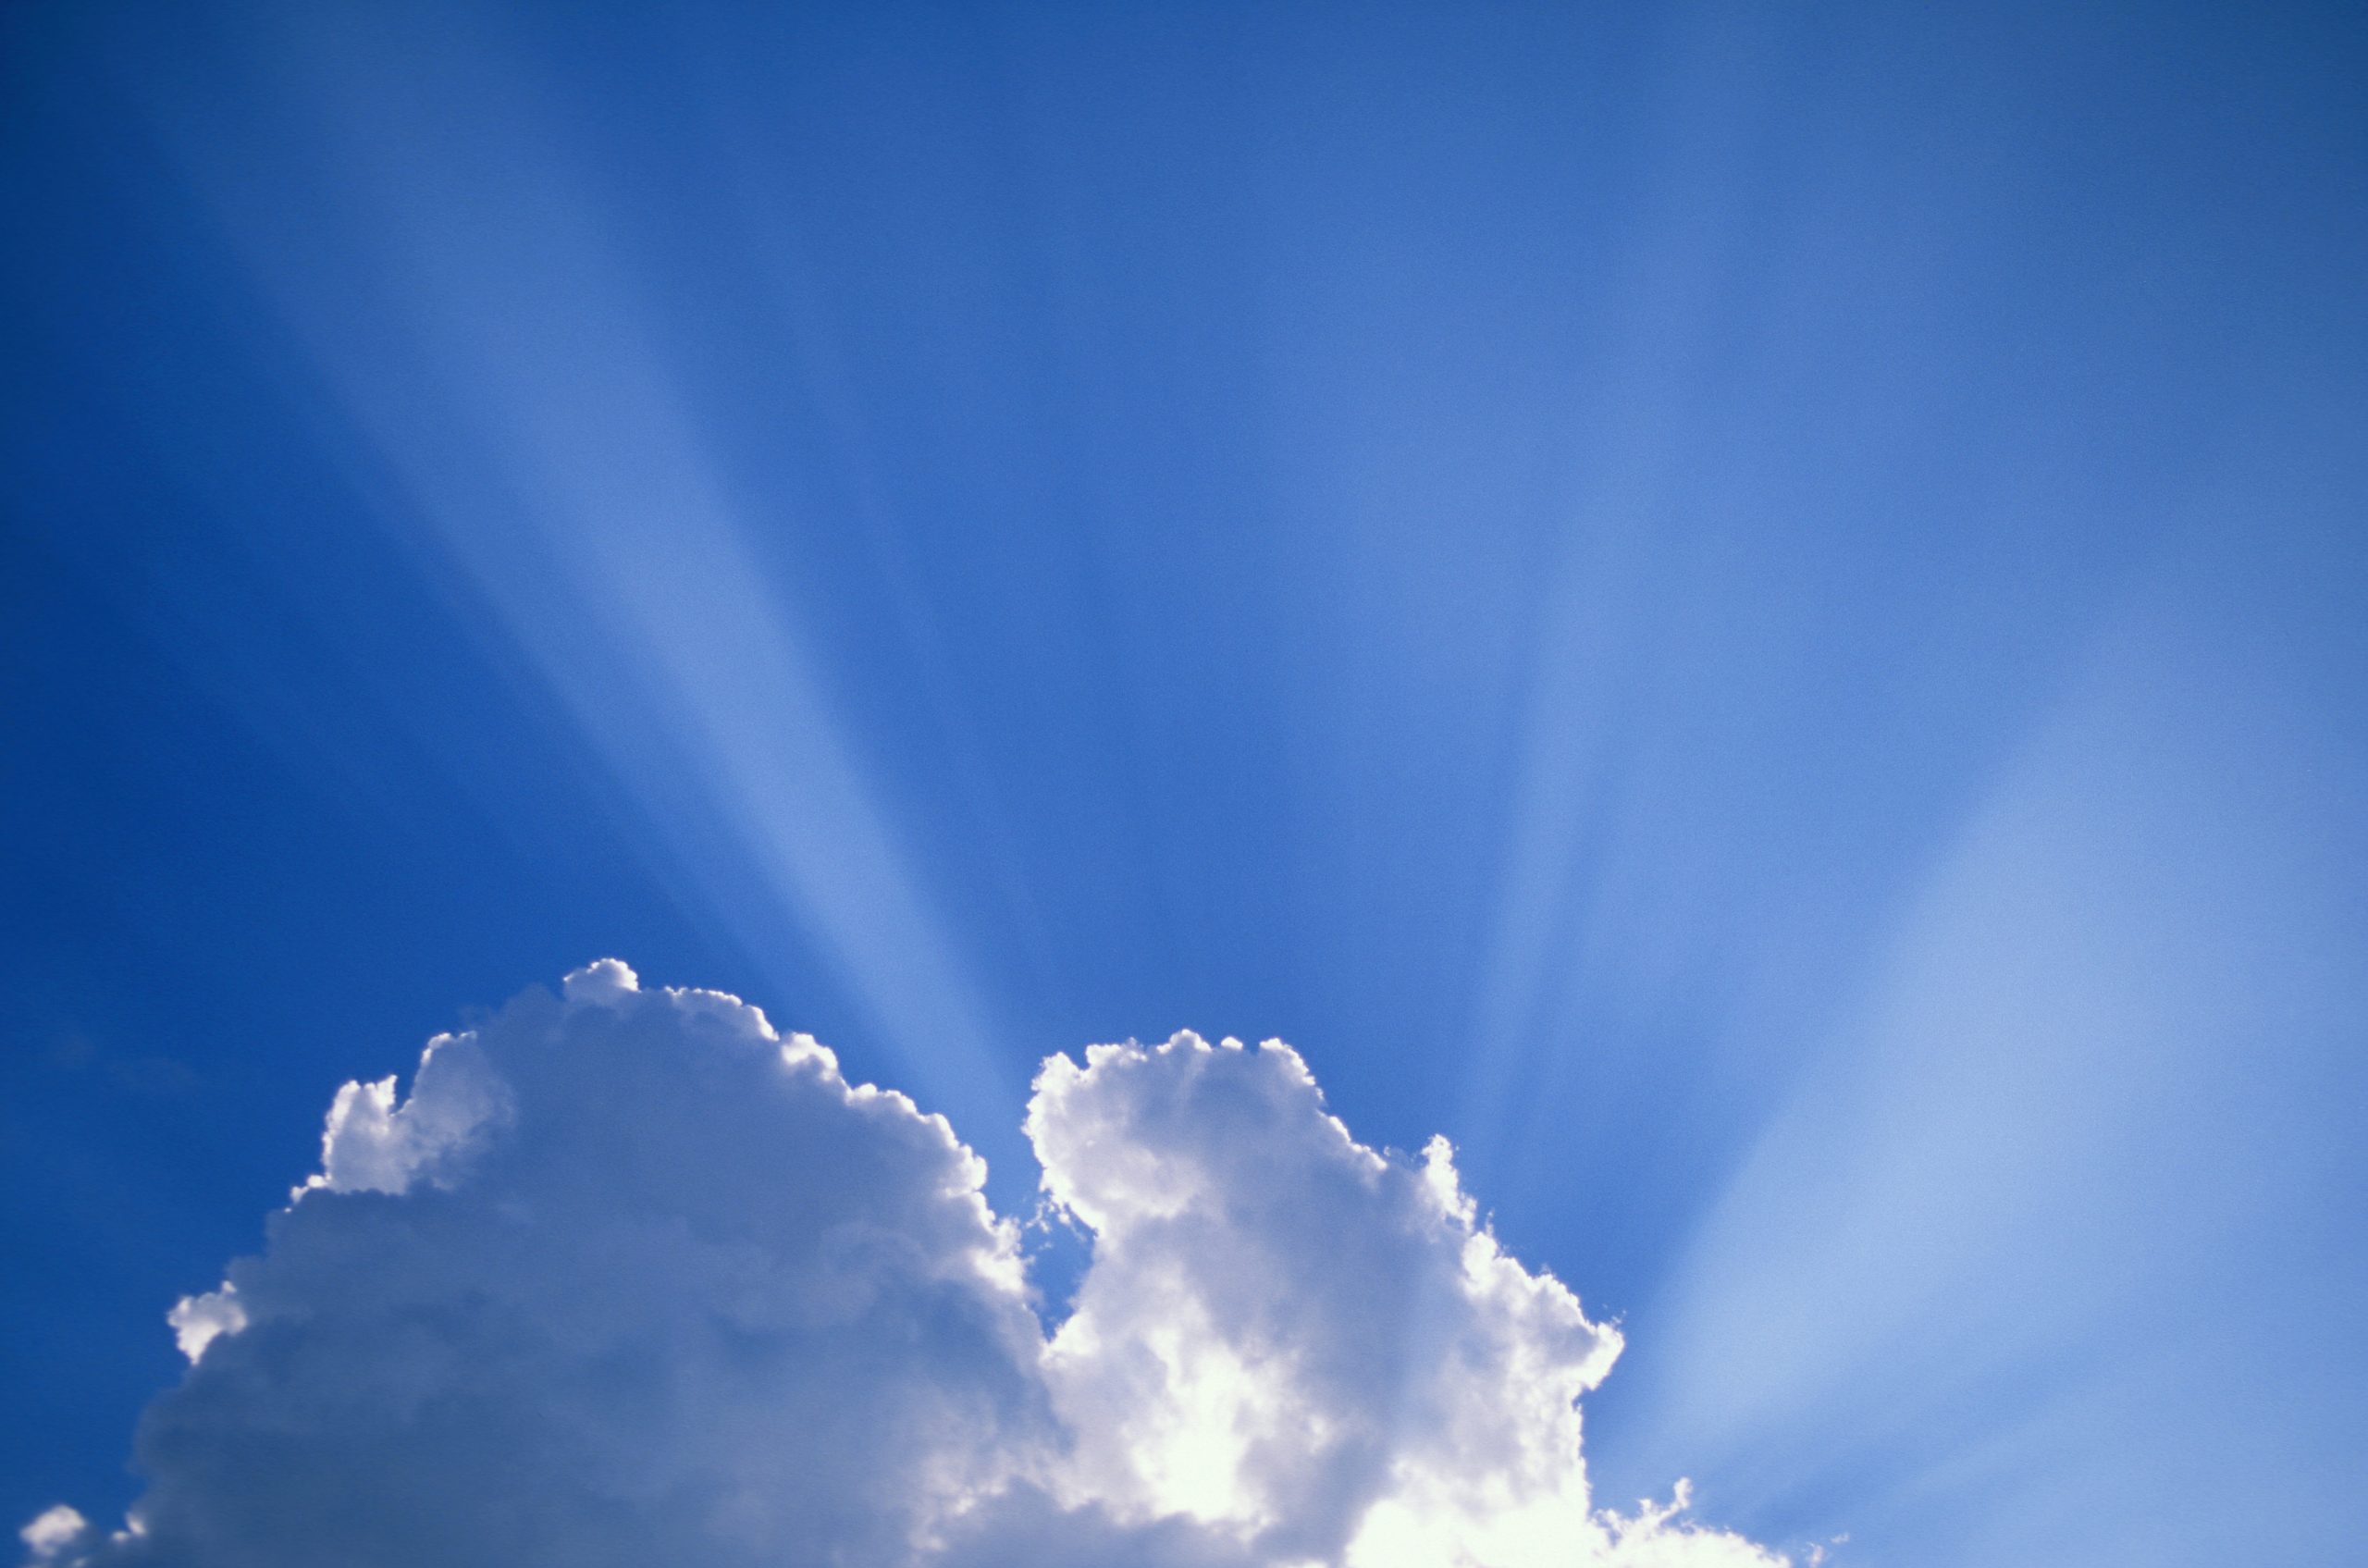 Sunrays bursting through a white cloud in the blue sky